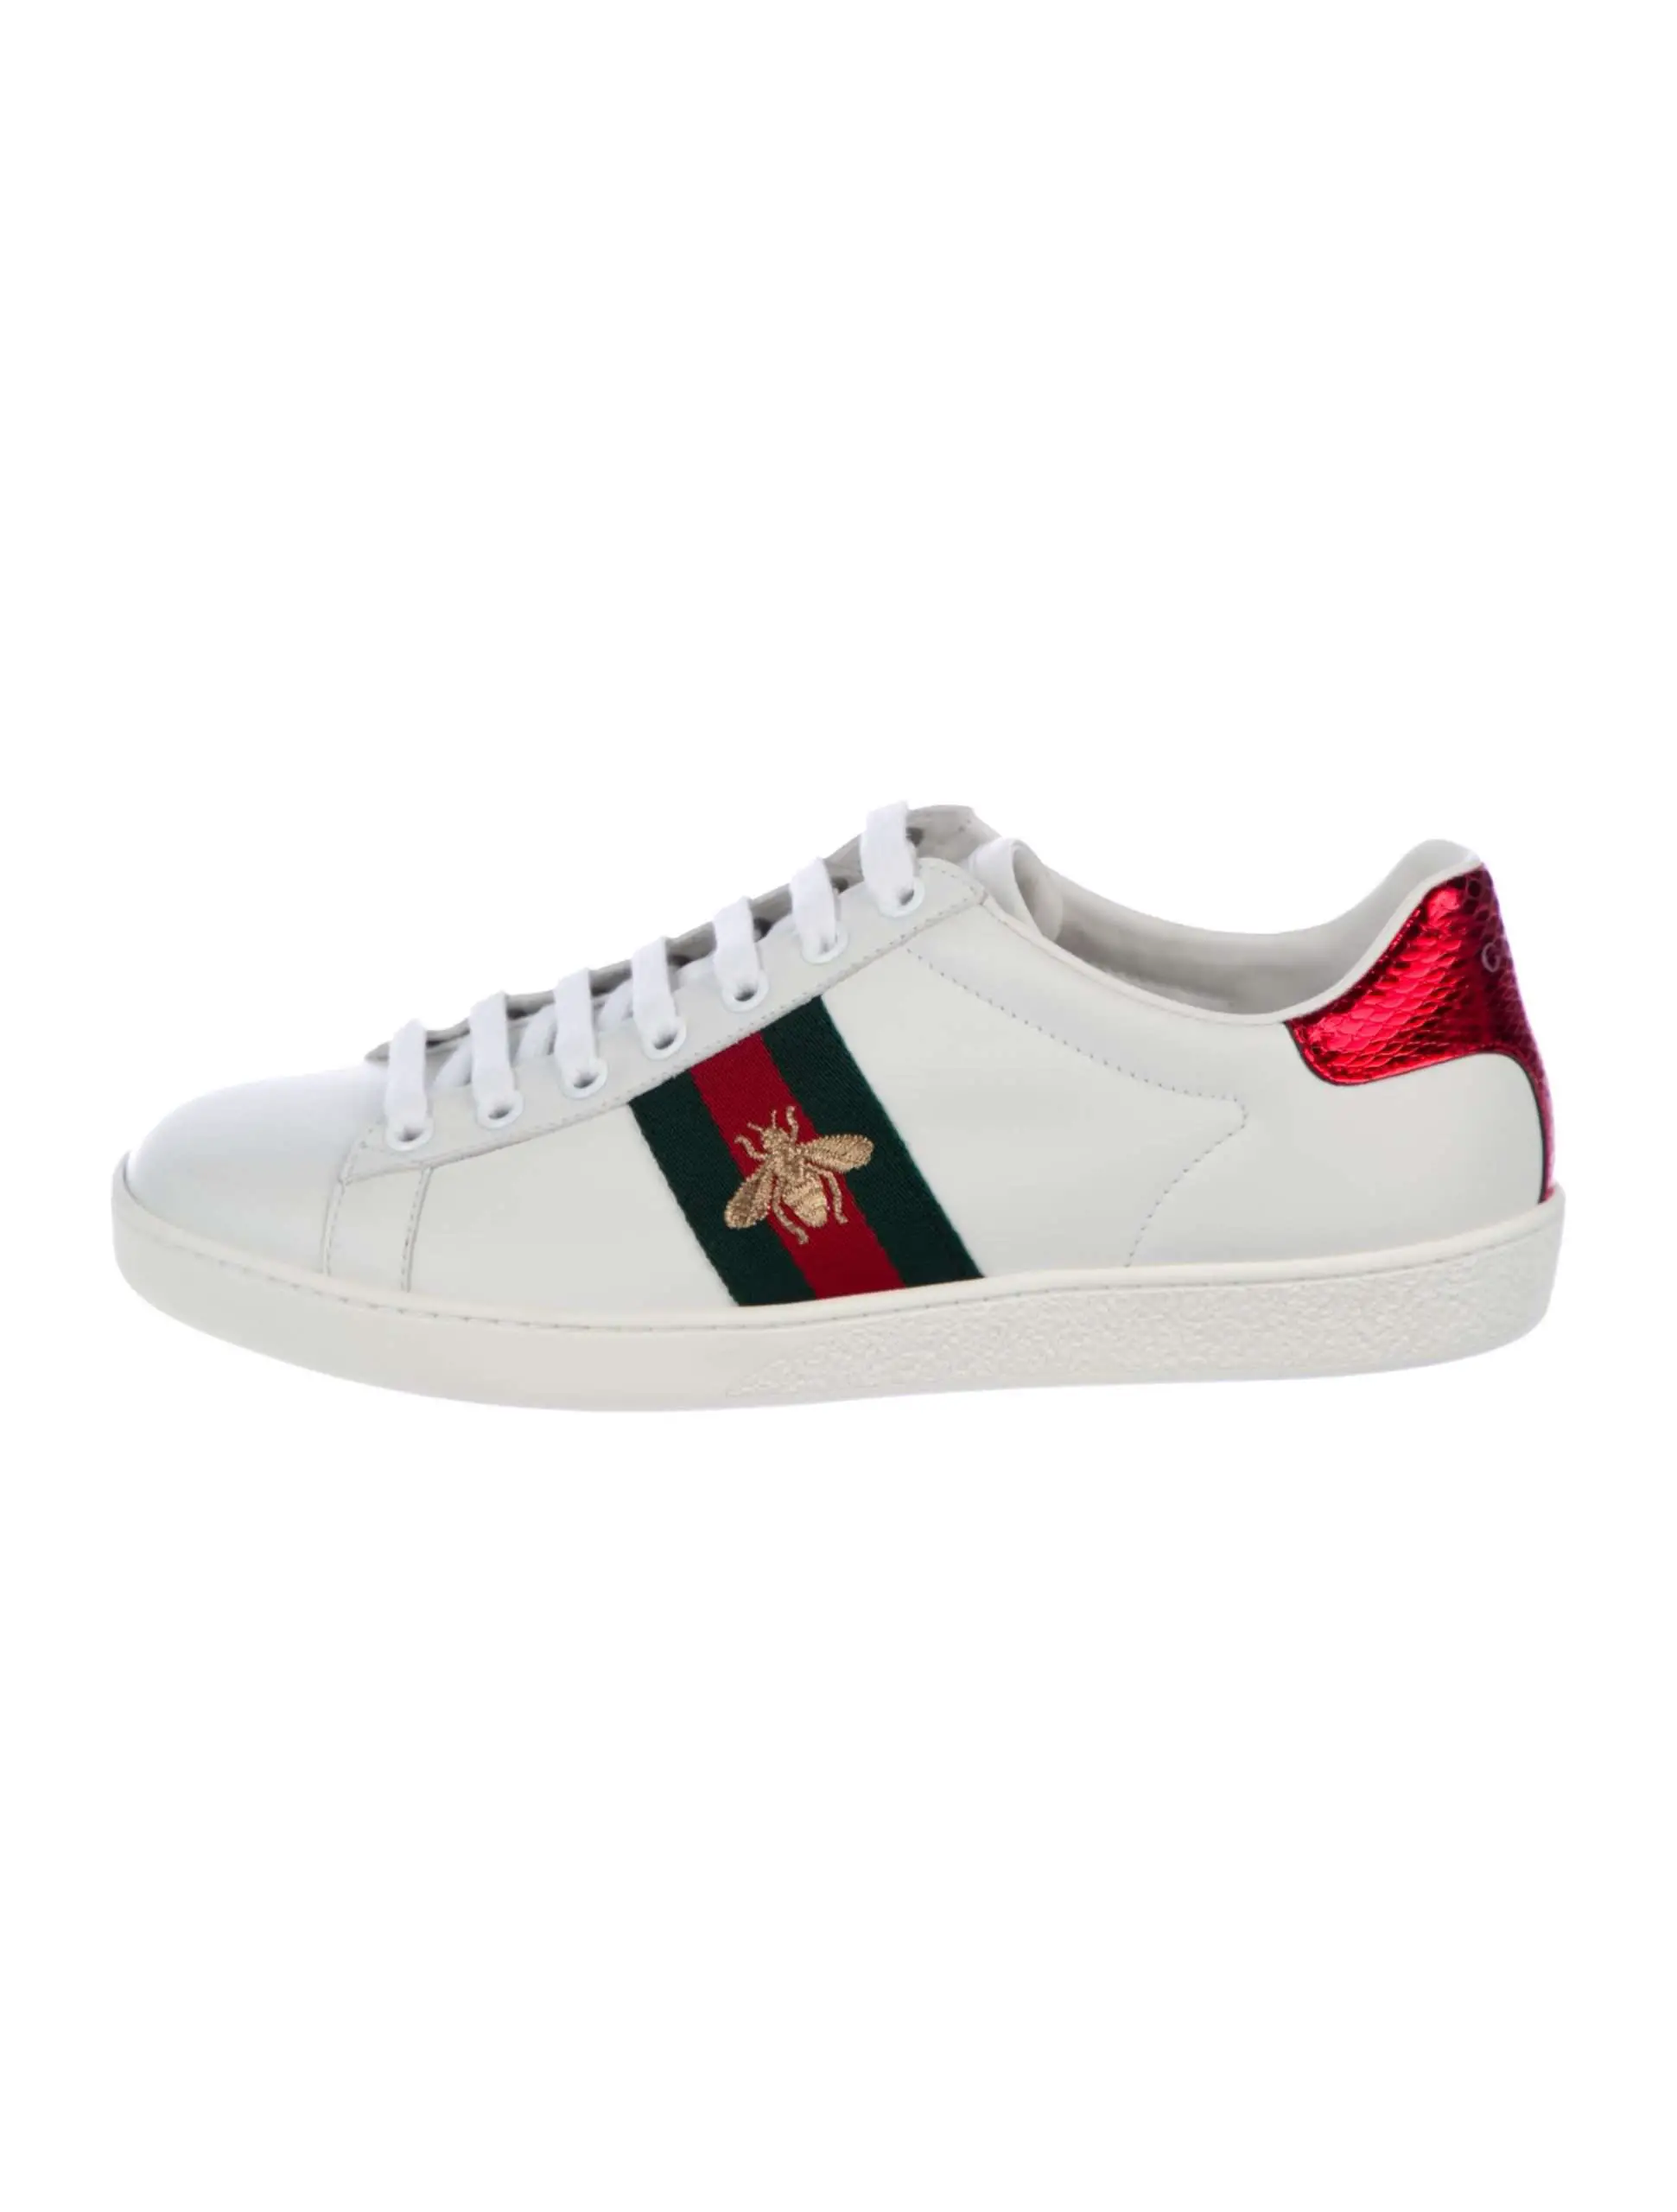 Gucci Ace Web Sneakers